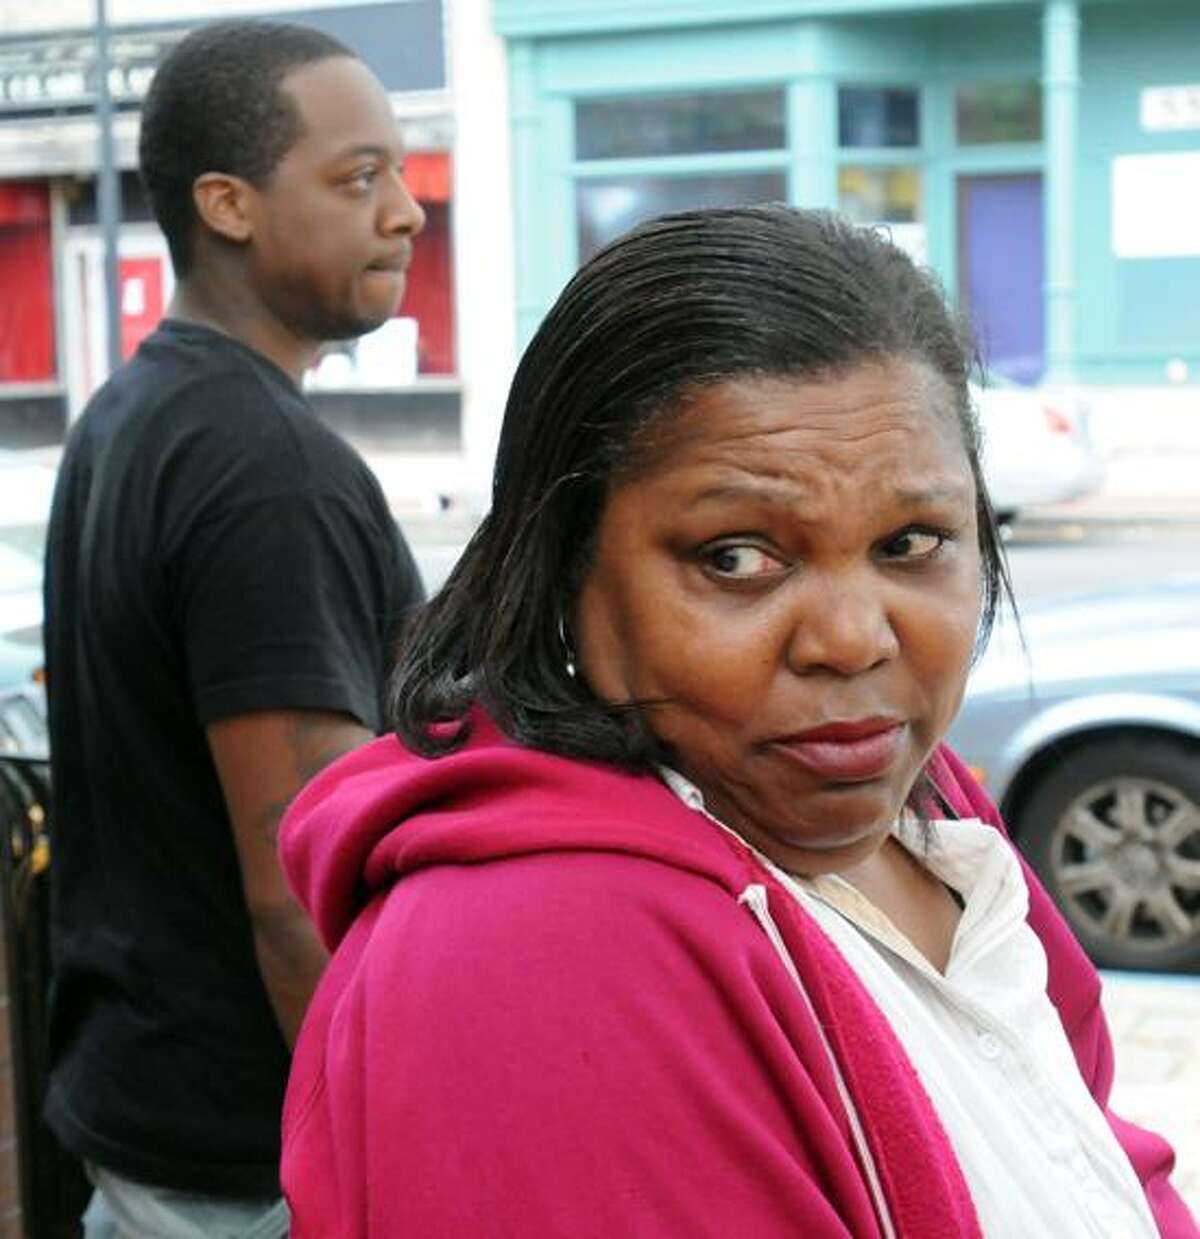 After Rita Renee Johnson was arraigned for murder at Meriden Superior Court, her alleged victim's aunt Francene Brown spoke to the media while glancing back at Johnson's friends and family. Mara Lavitt/New Haven Register